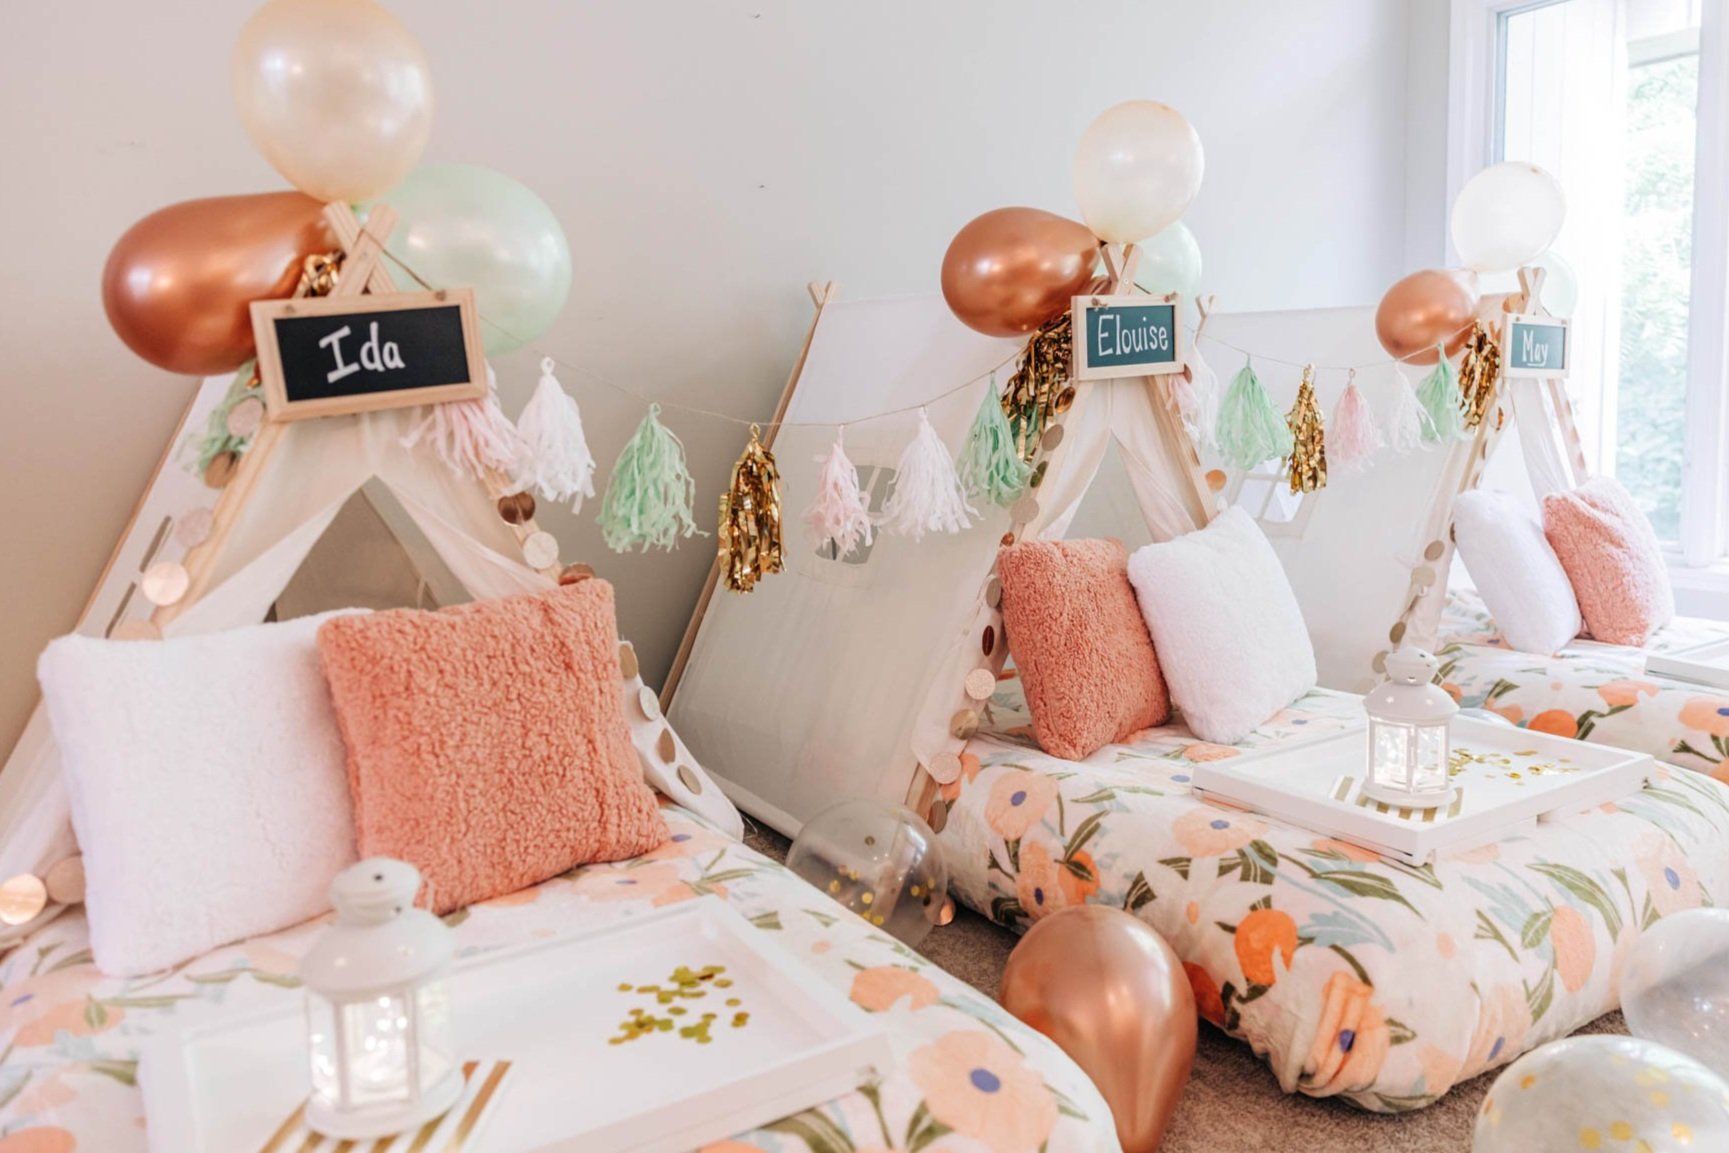 Fun Themes & Decorations for a Sleepover Party - Katie J Design and Events